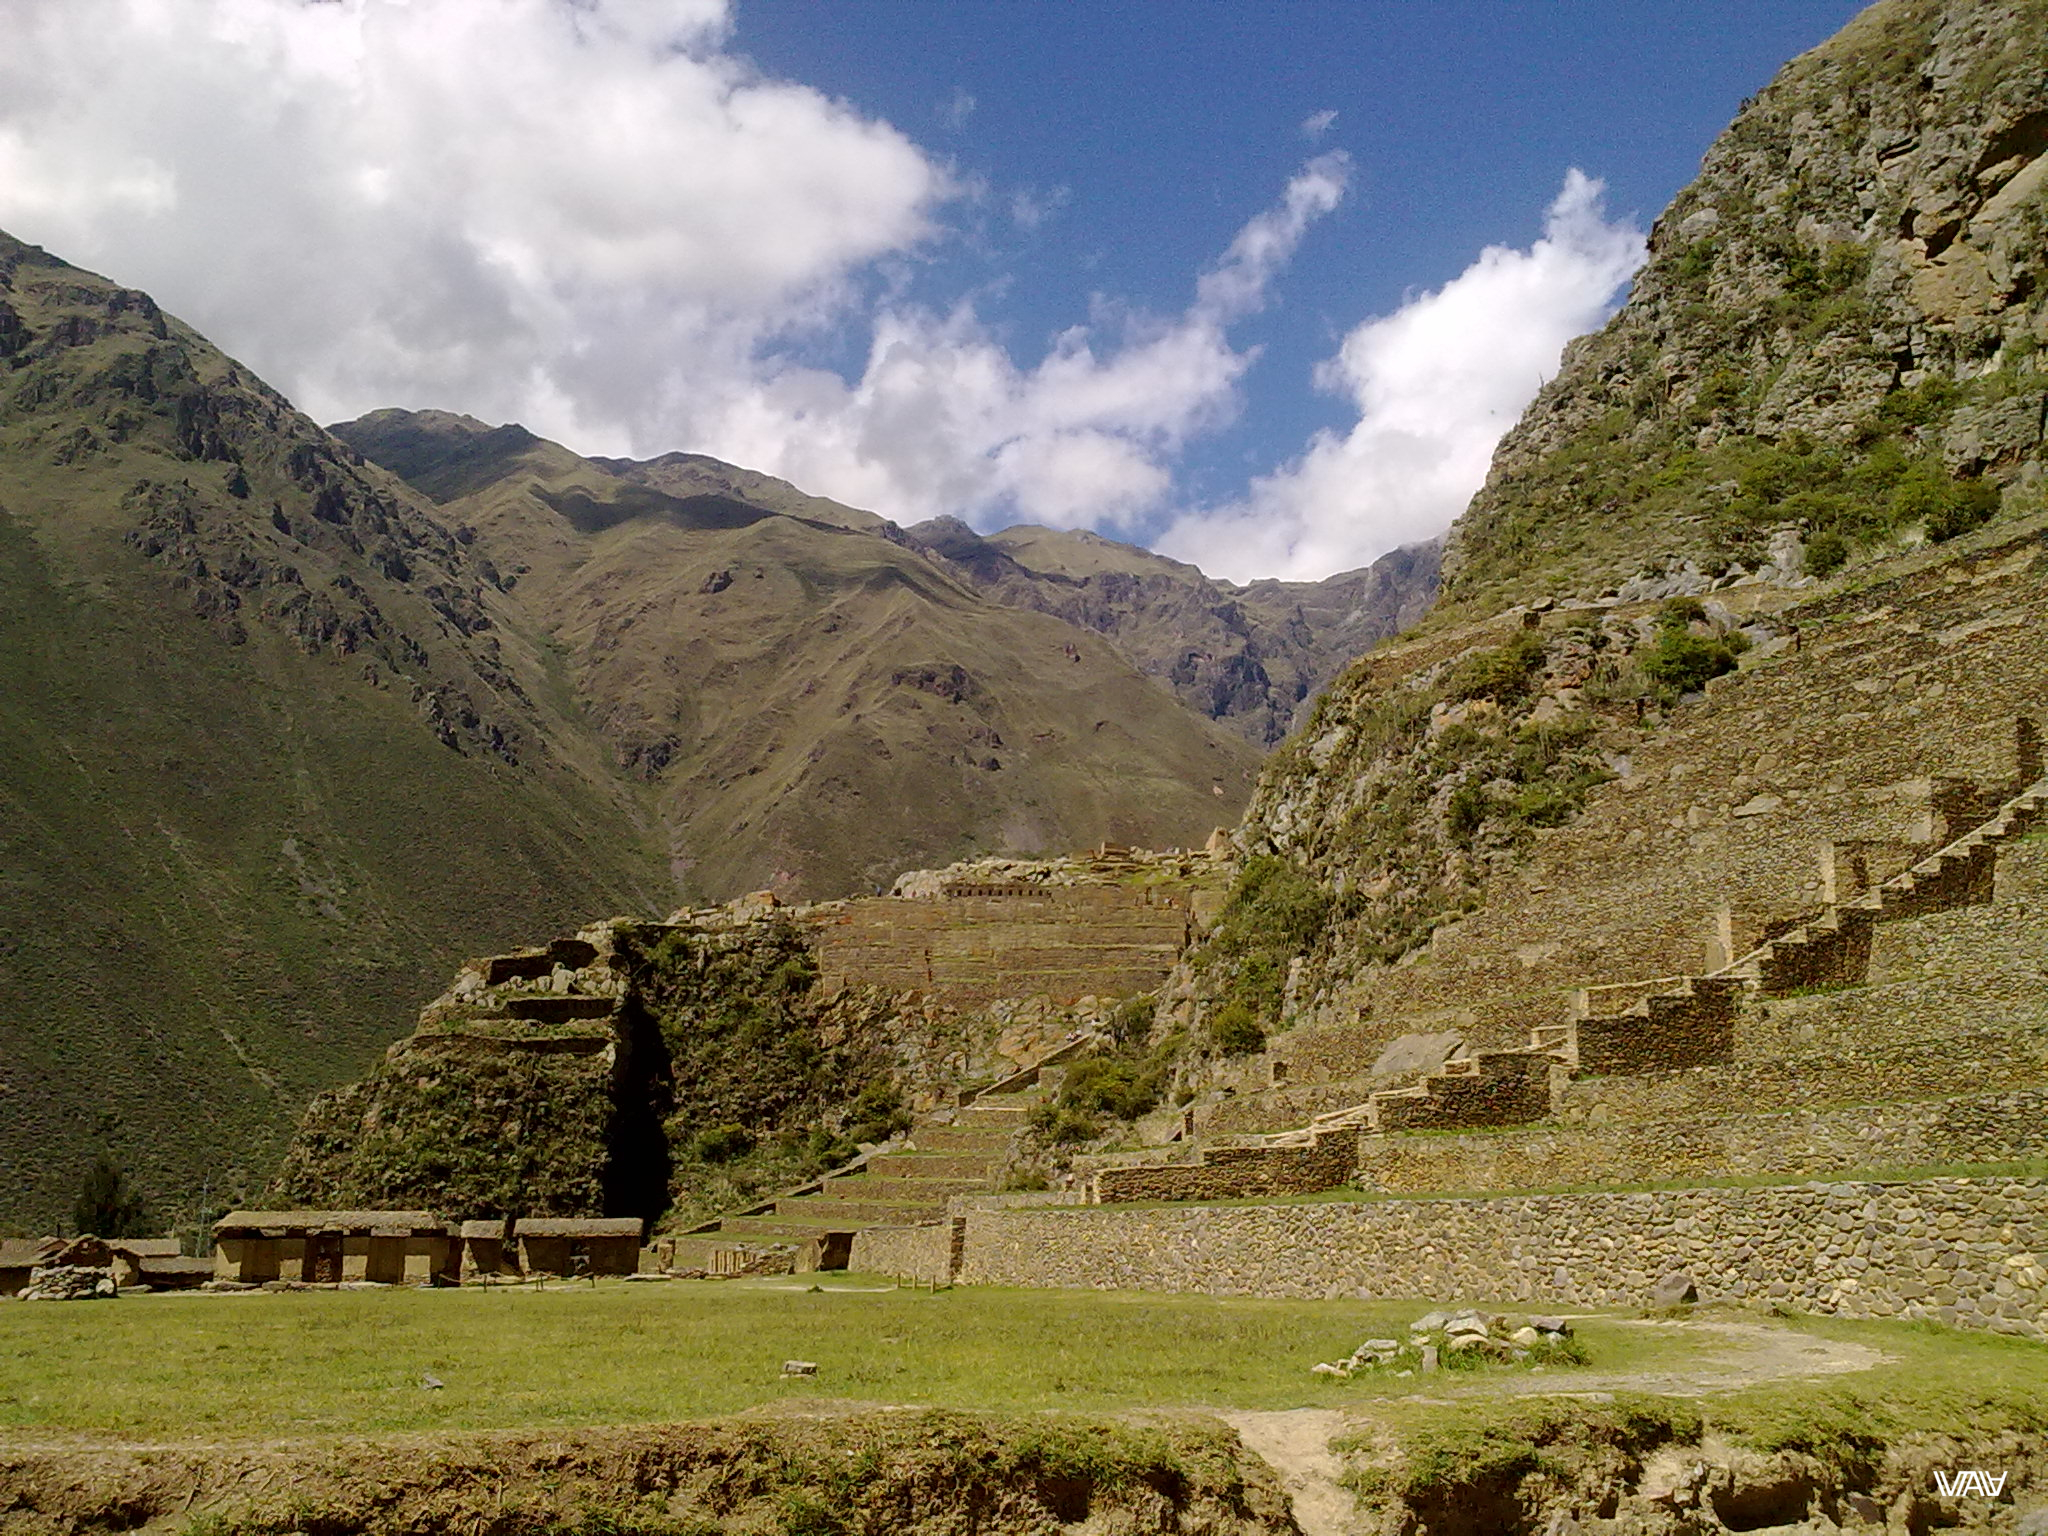 Fascinating view from the ancient city of the Incas. Ollantaytambo, Peru